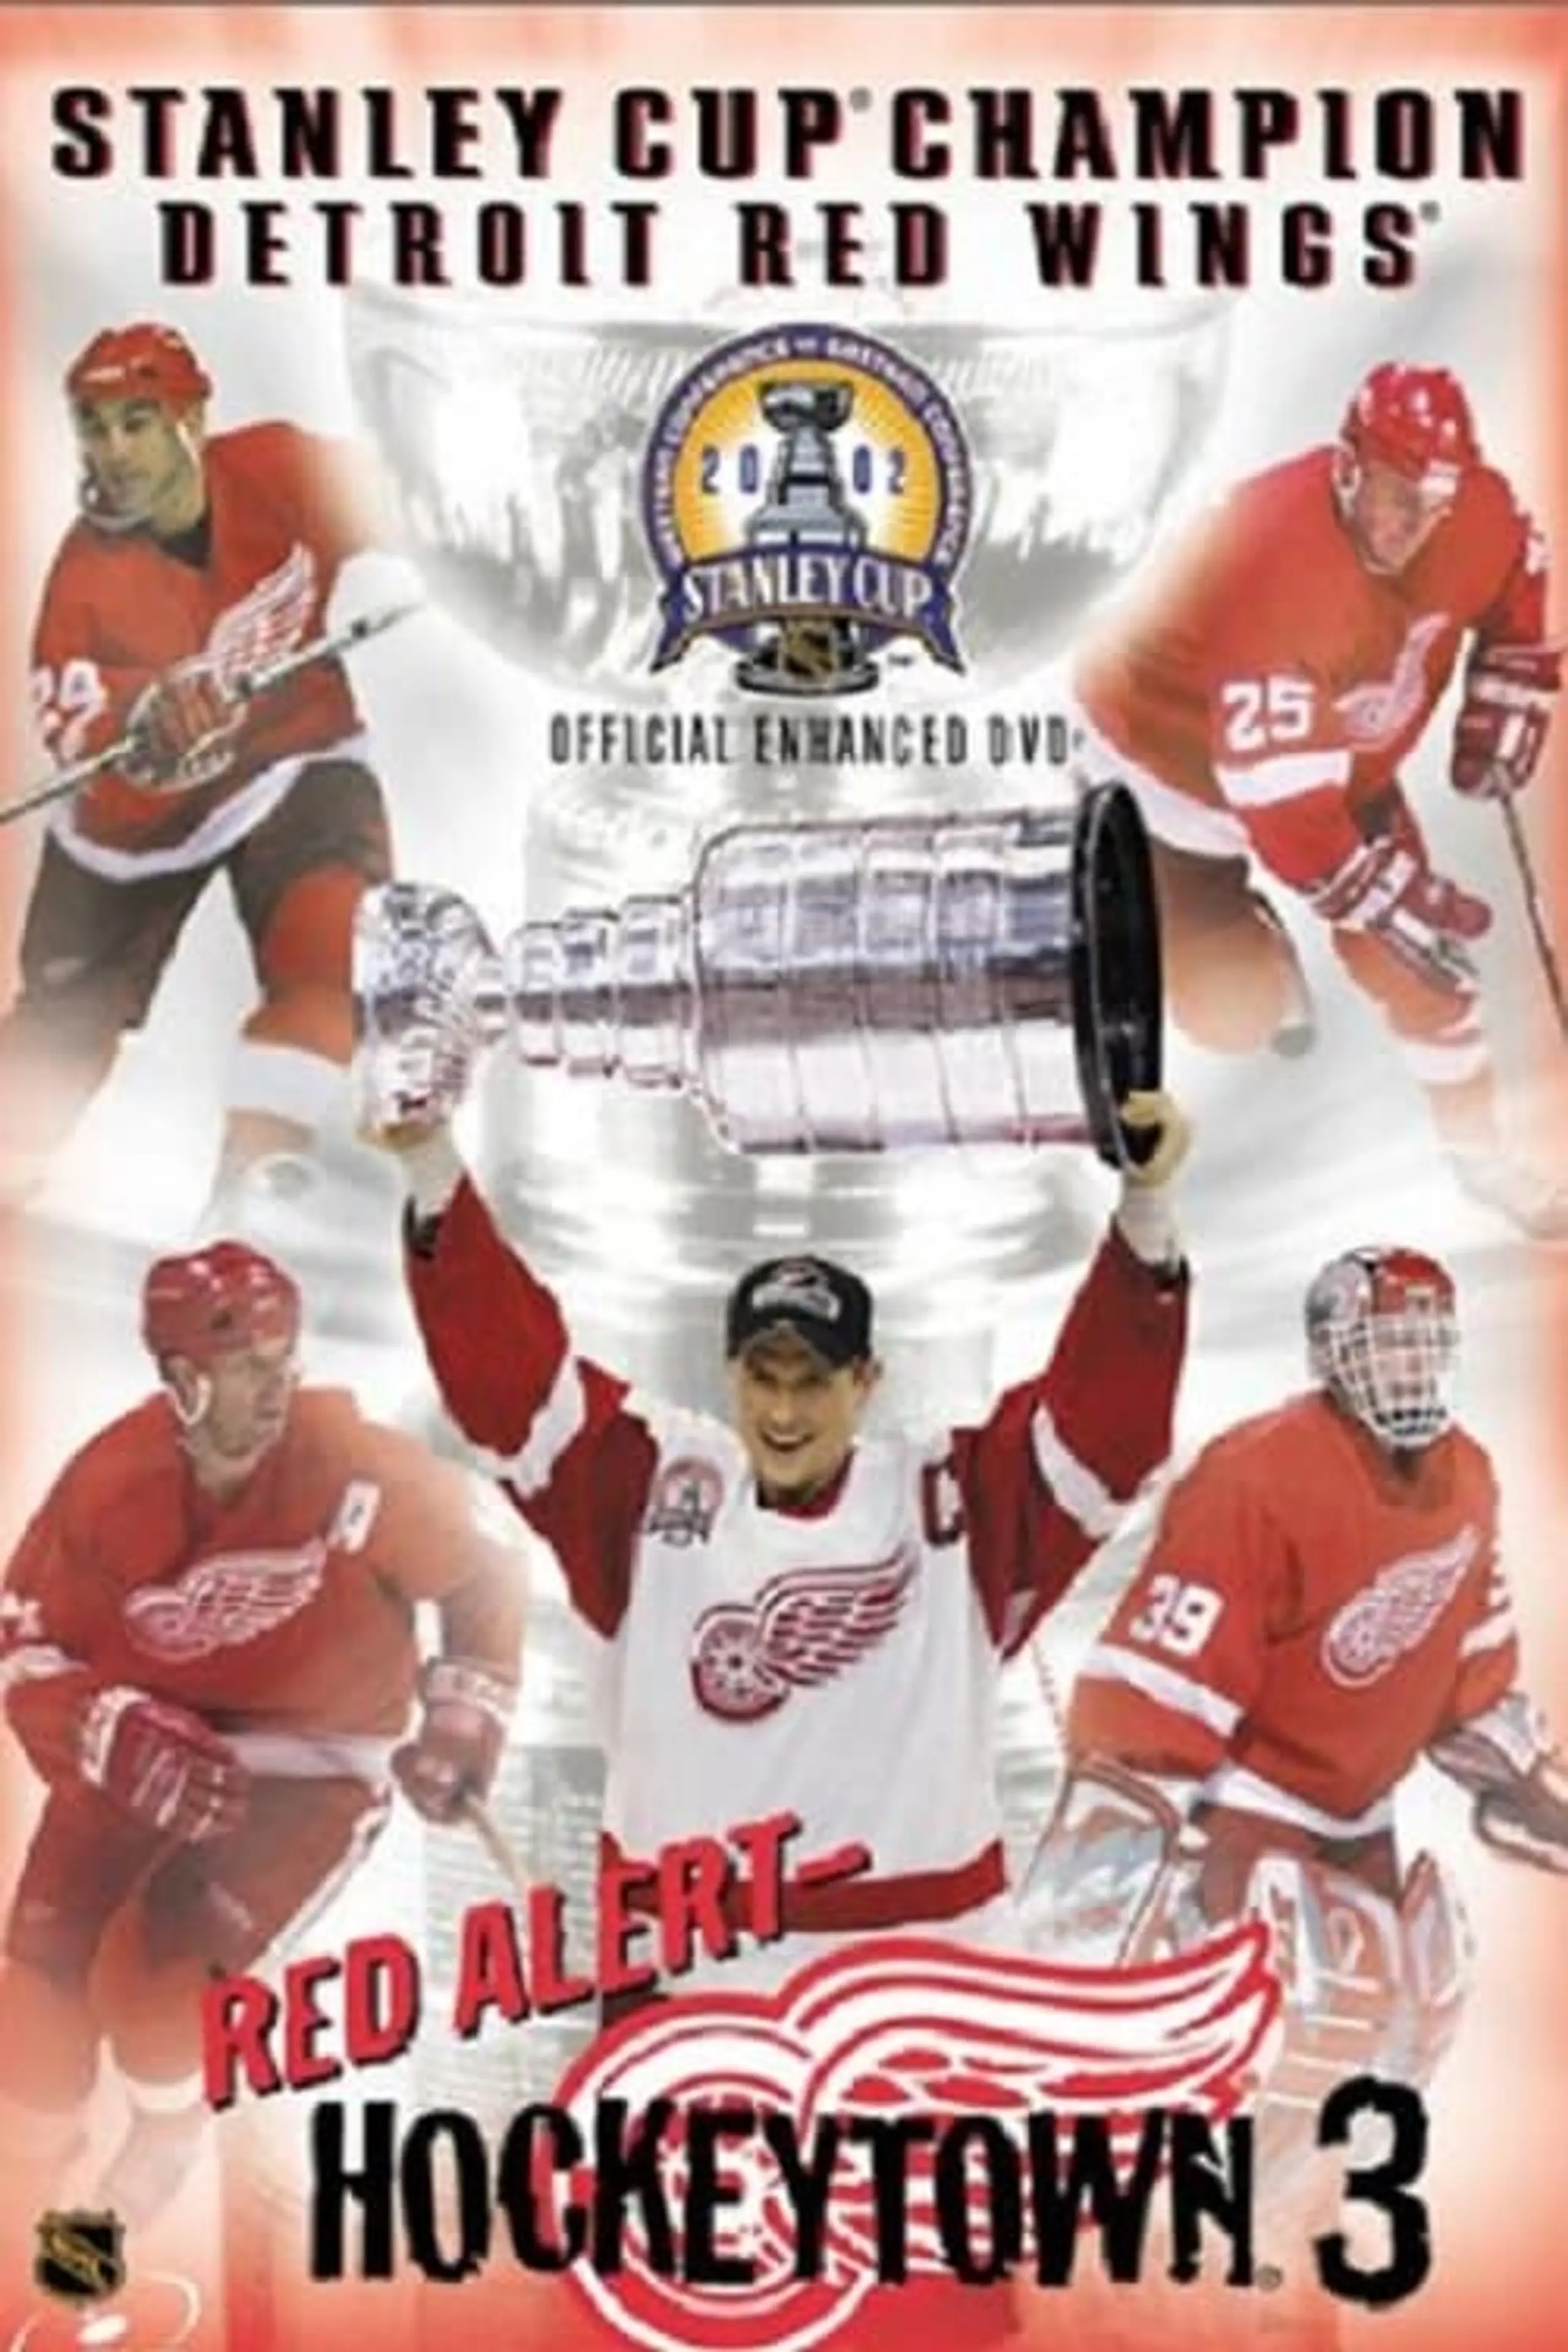 Red Alert - Hockeytown 3 - 2002 Stanley Cup Champion Detroit Red Wings